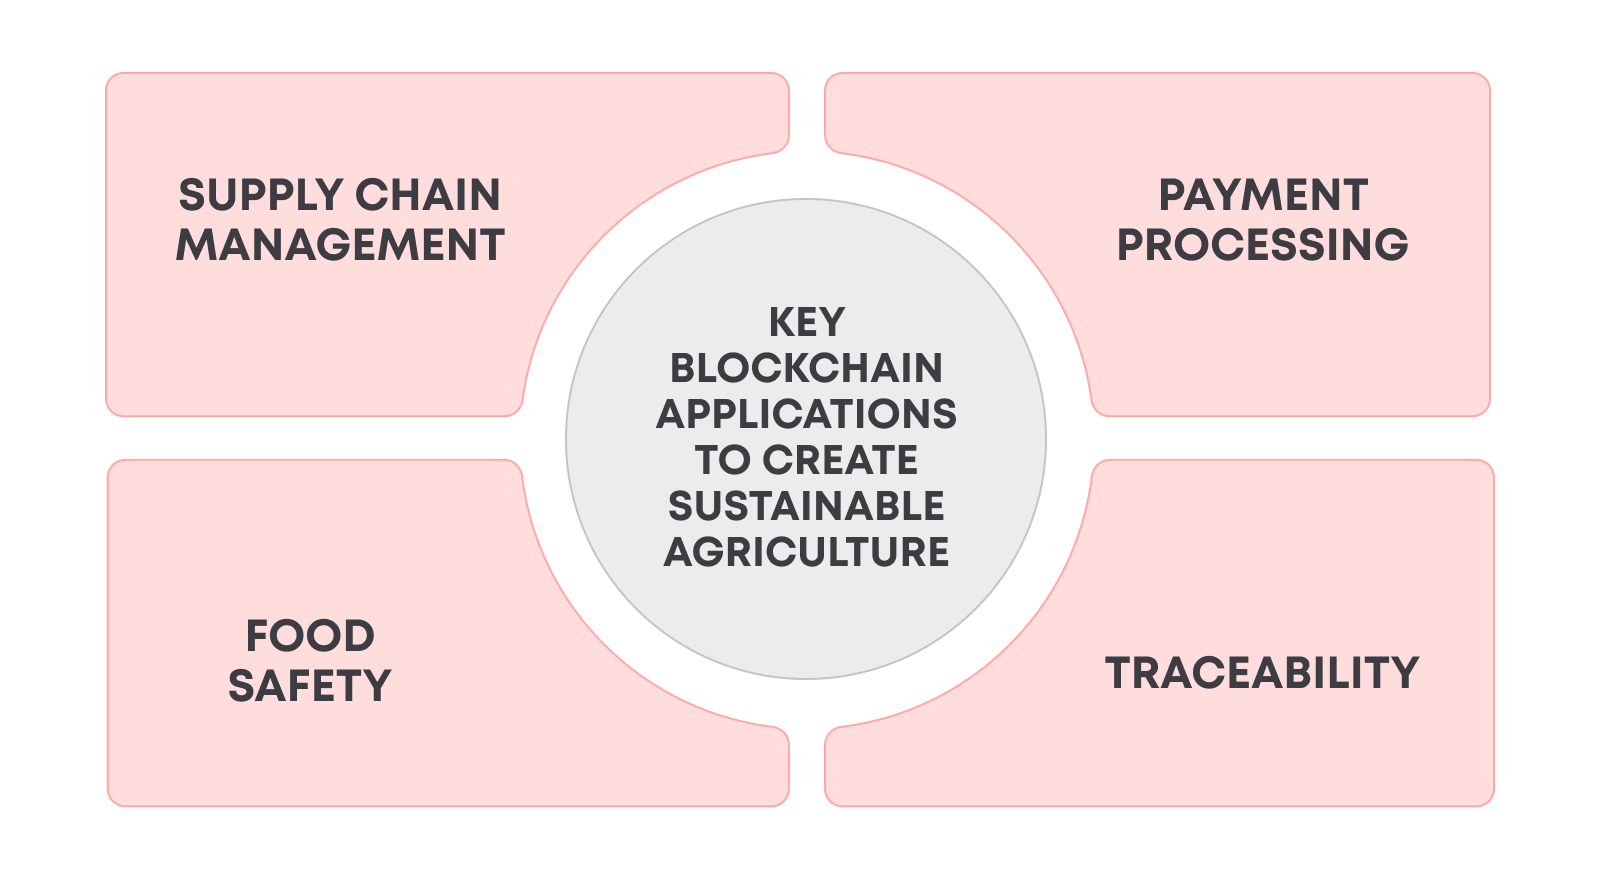 While the applications of blockchain in agriculture are diverse, the market currently focuses on Supply Chain Management, Food Safety, Traceability and Payment Processing.